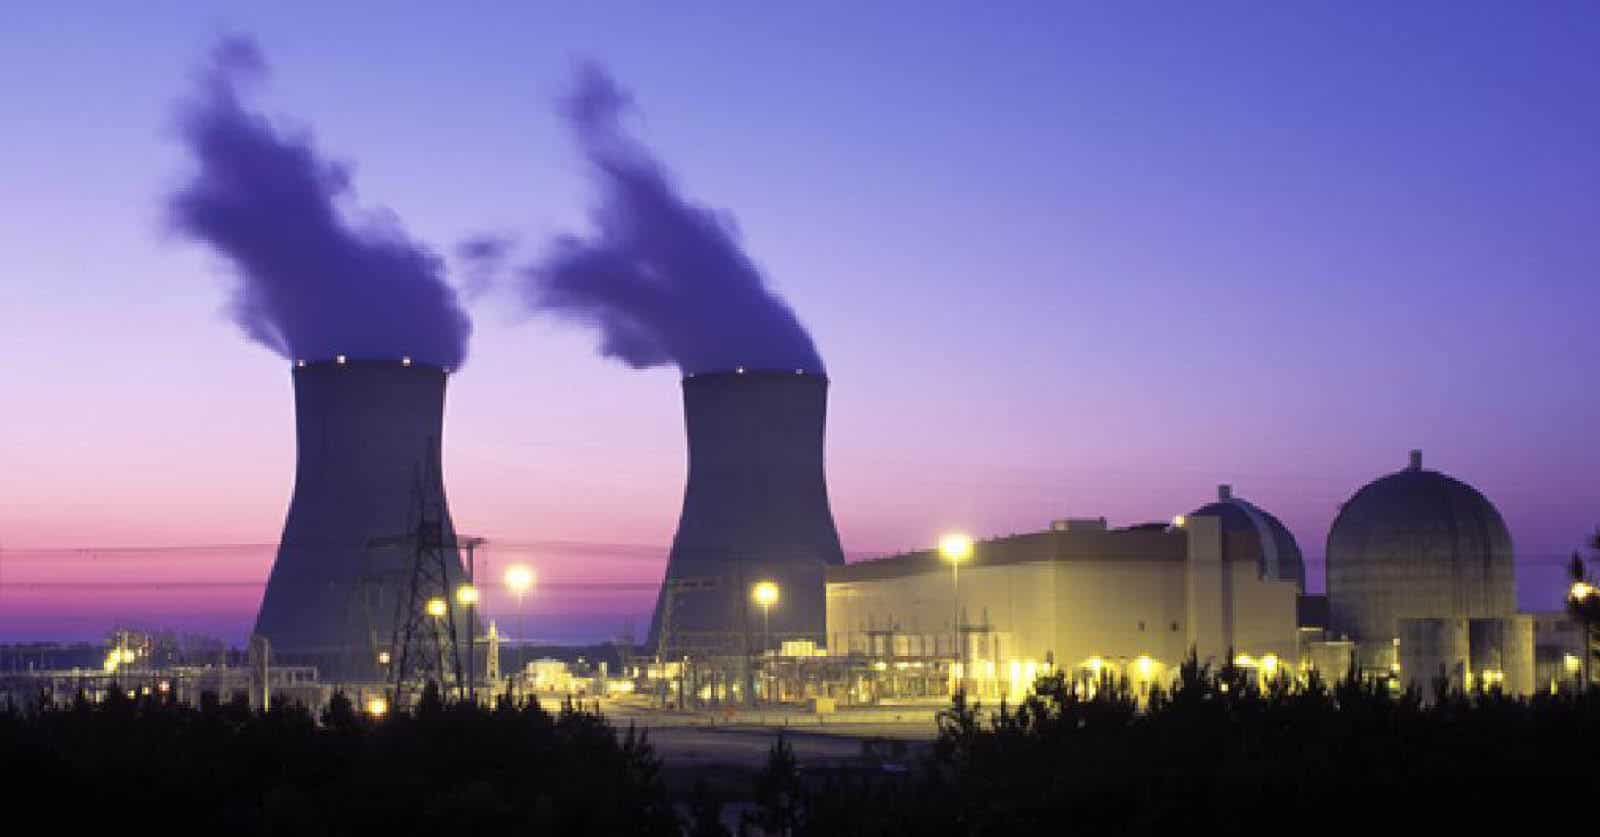 Subsidies for Nuclear Reactor Projects Waste Taxpayer Money